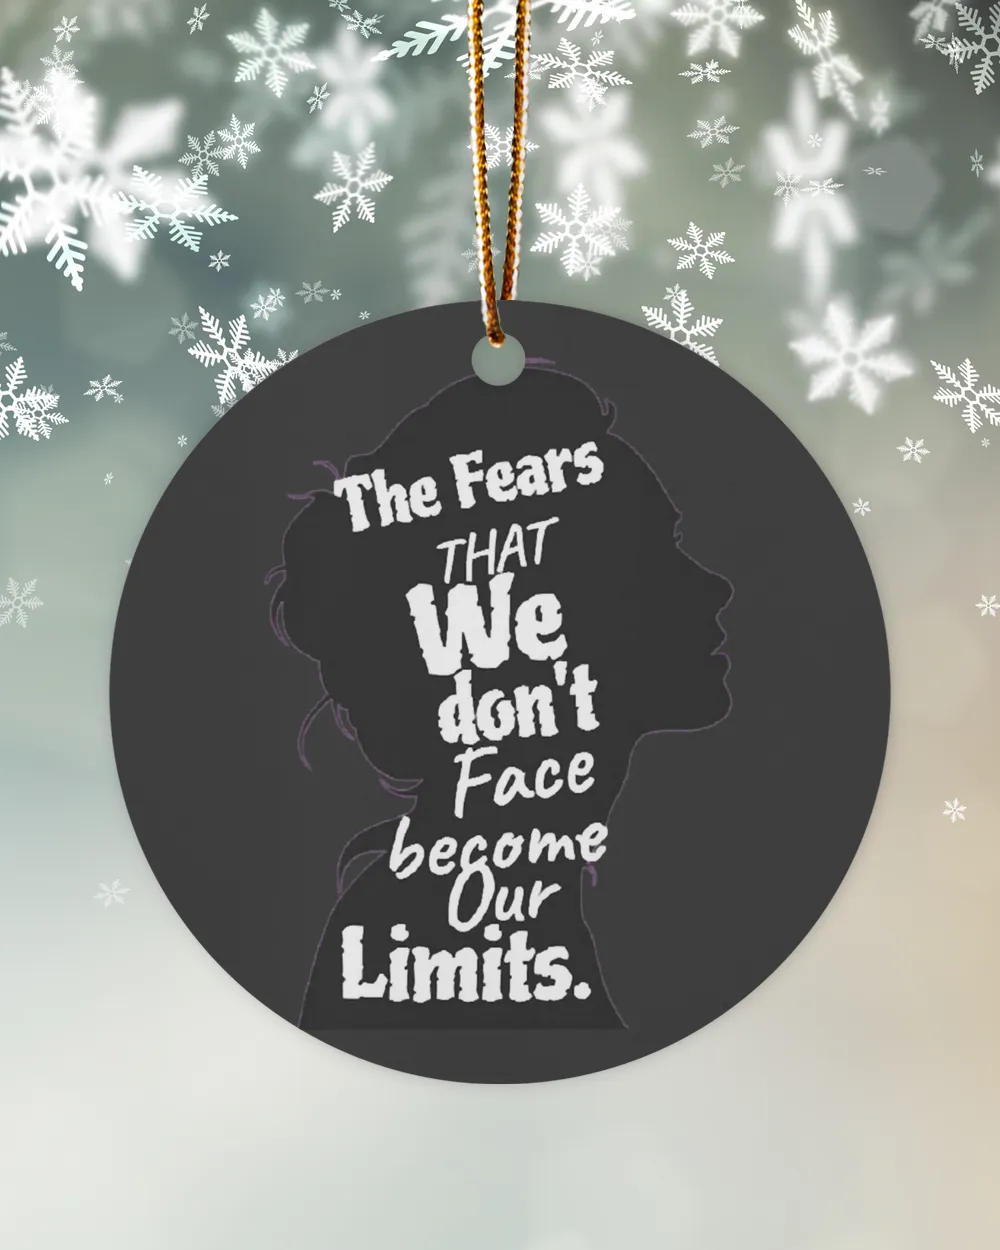 Christian Fears Become Limits Motivational Quotes 34 Bibble Jesus